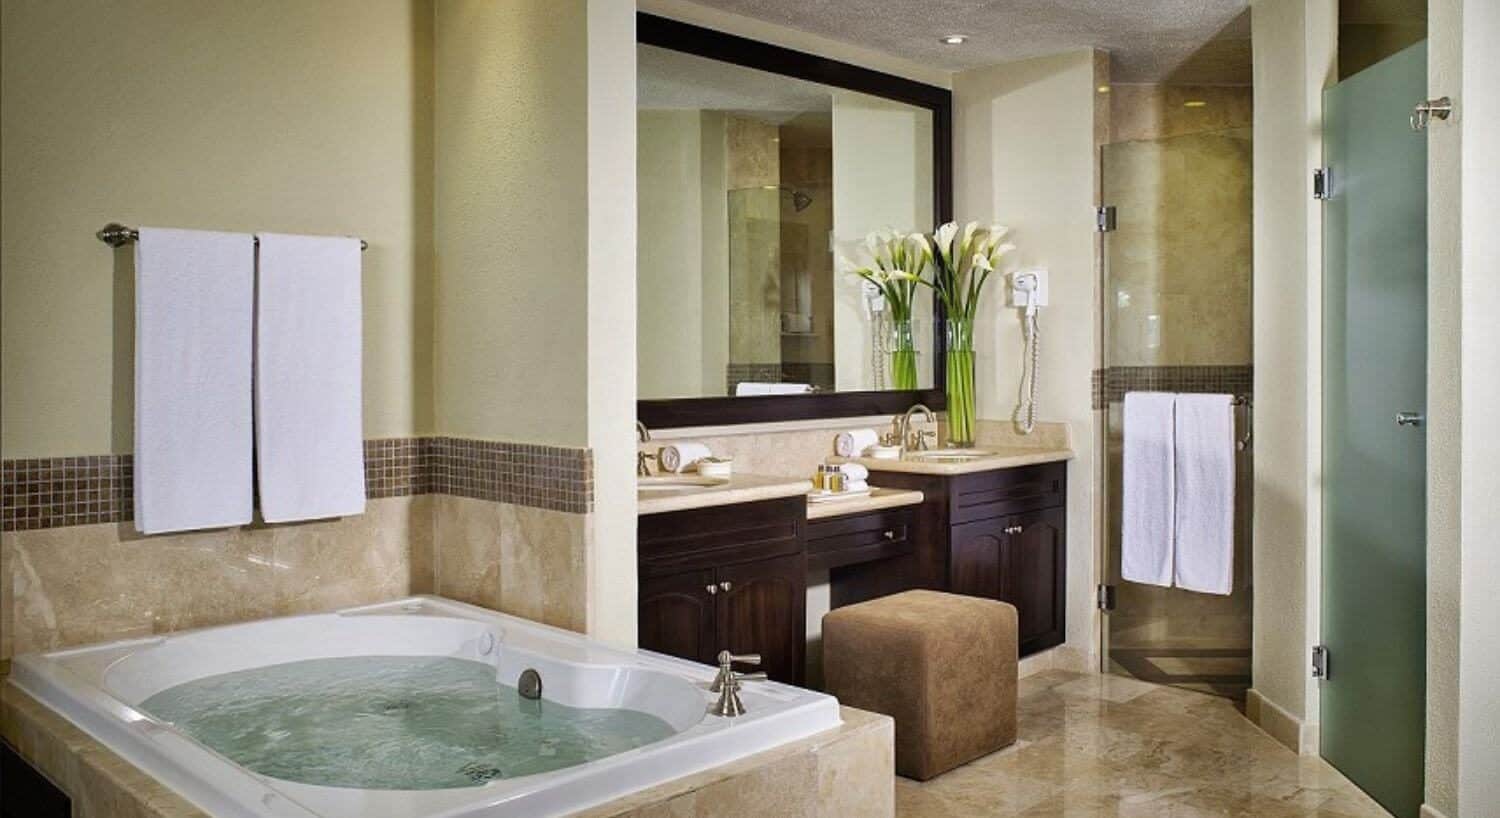 A bathroom with a jacuzzi tub, double sink vanities, and a shower.